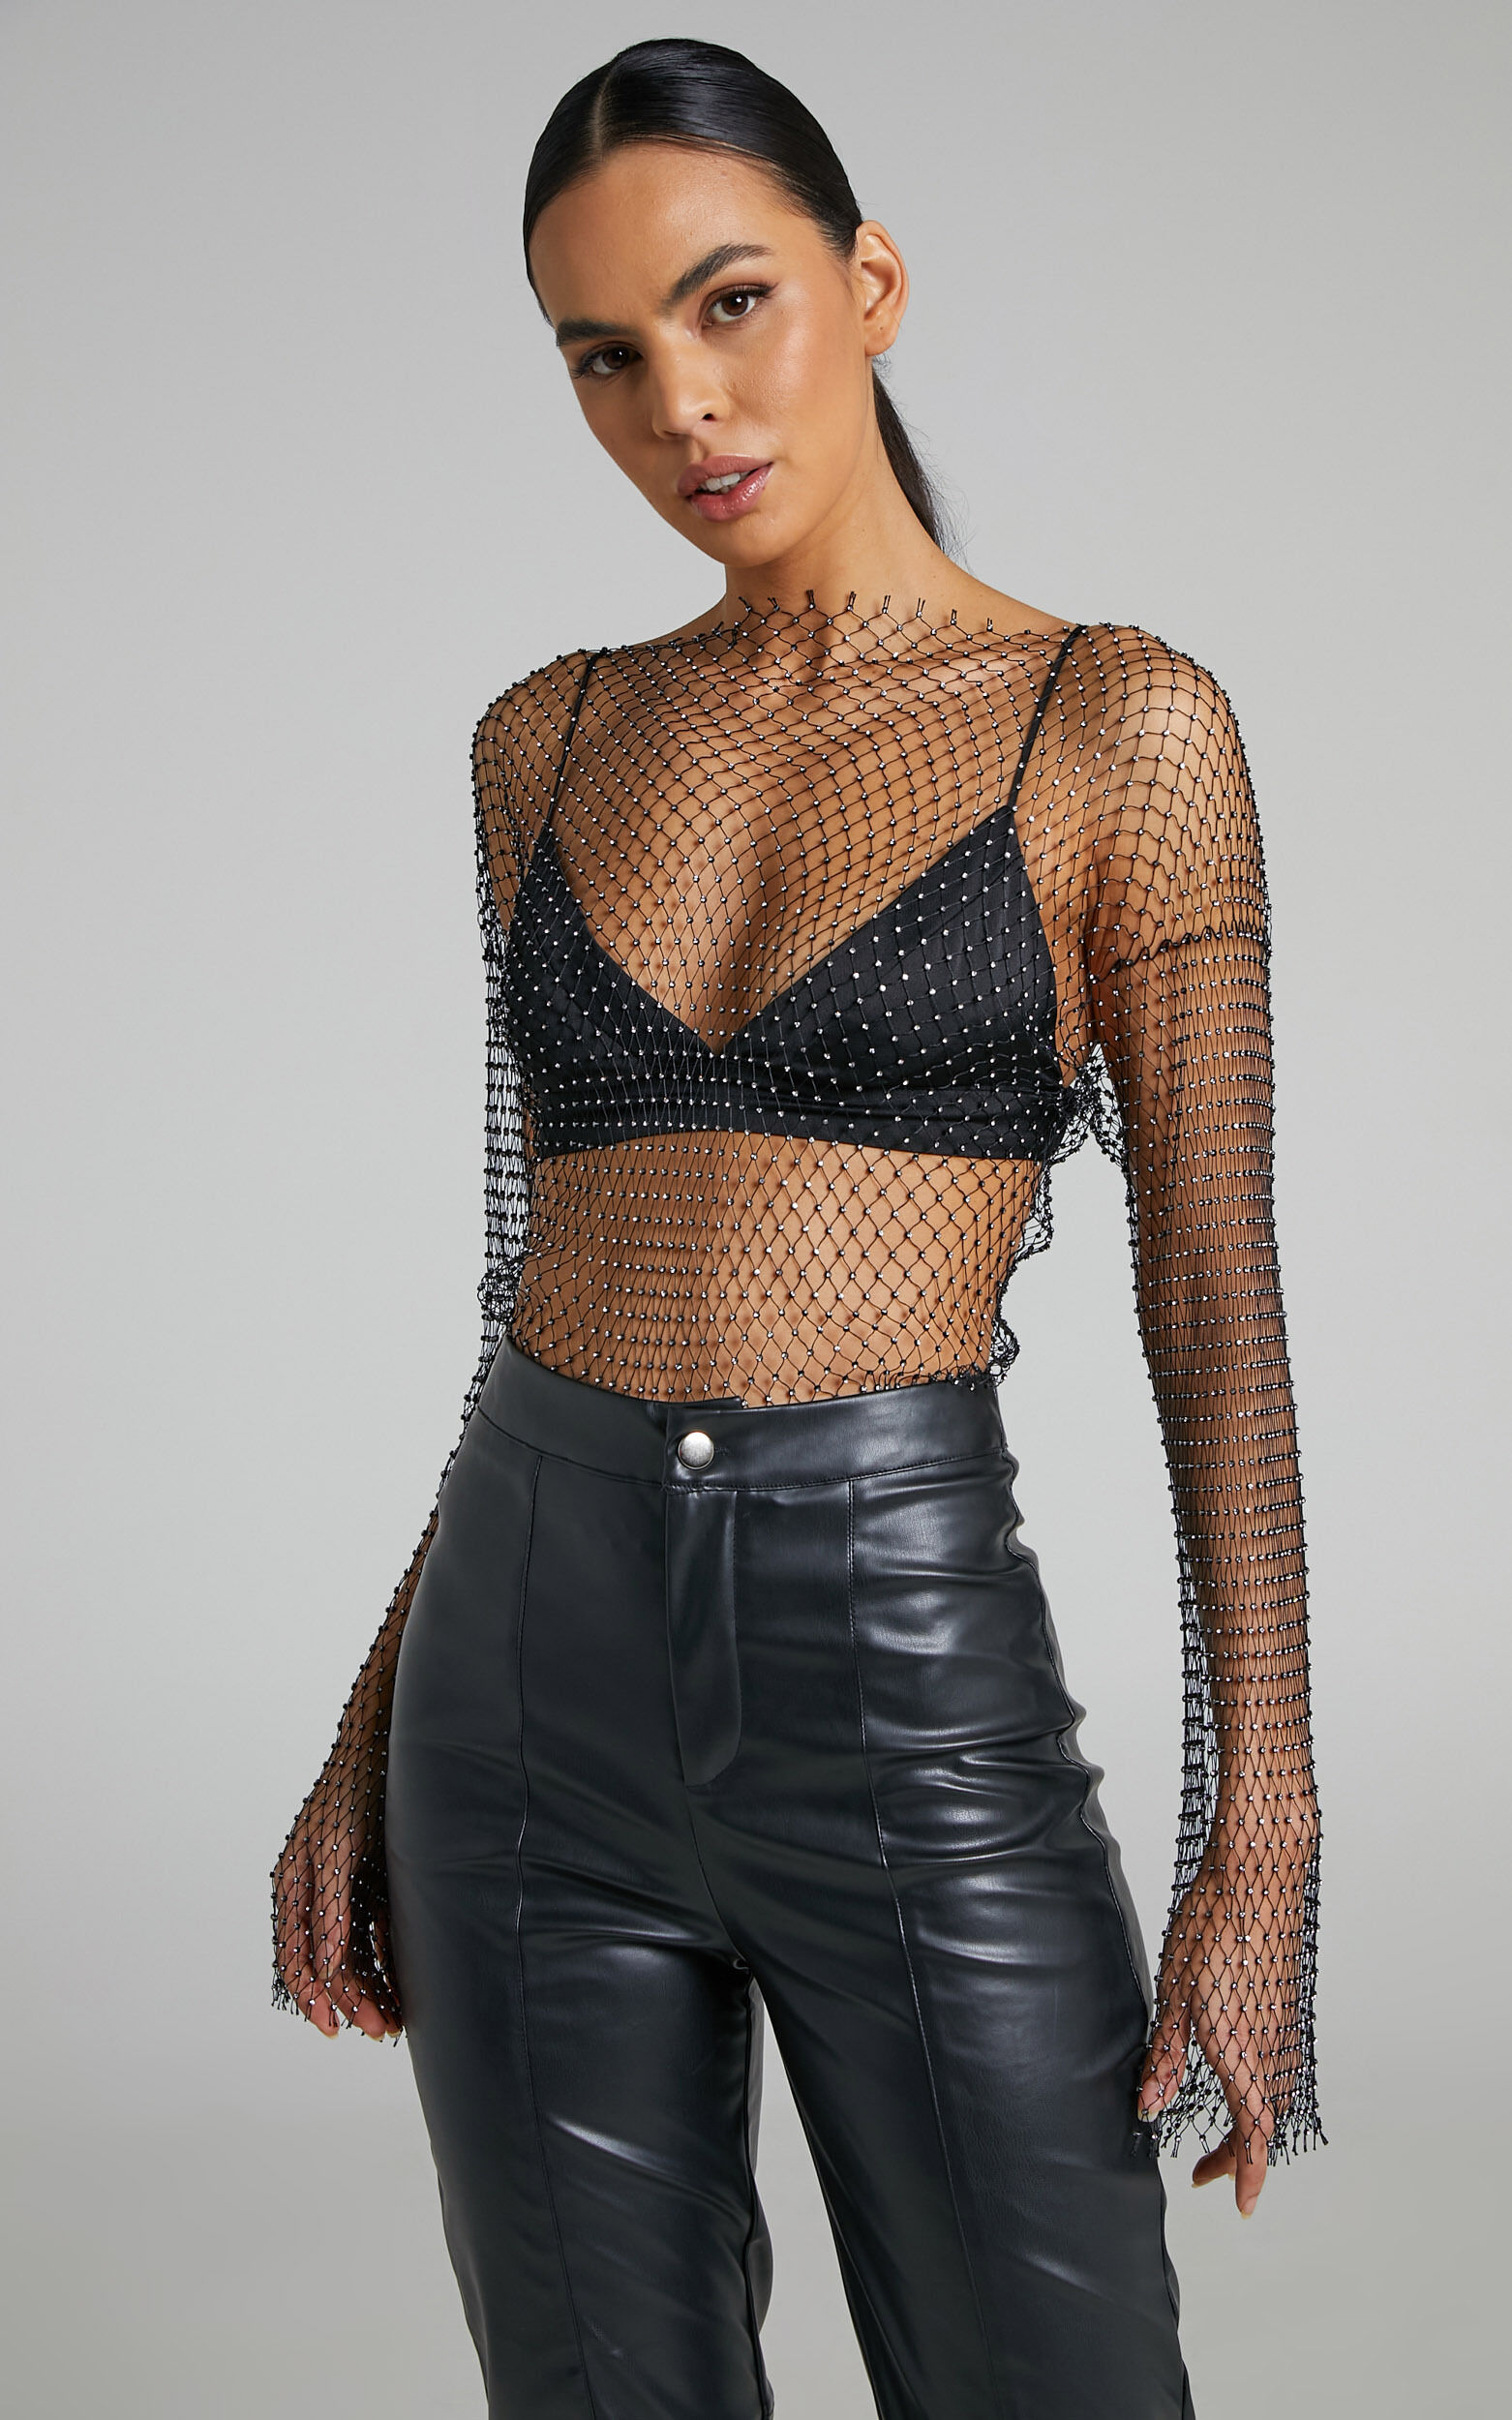 Charess Diamante Mesh Long Sleeve Top in Black - OneSize, BLK1, super-hi-res image number null